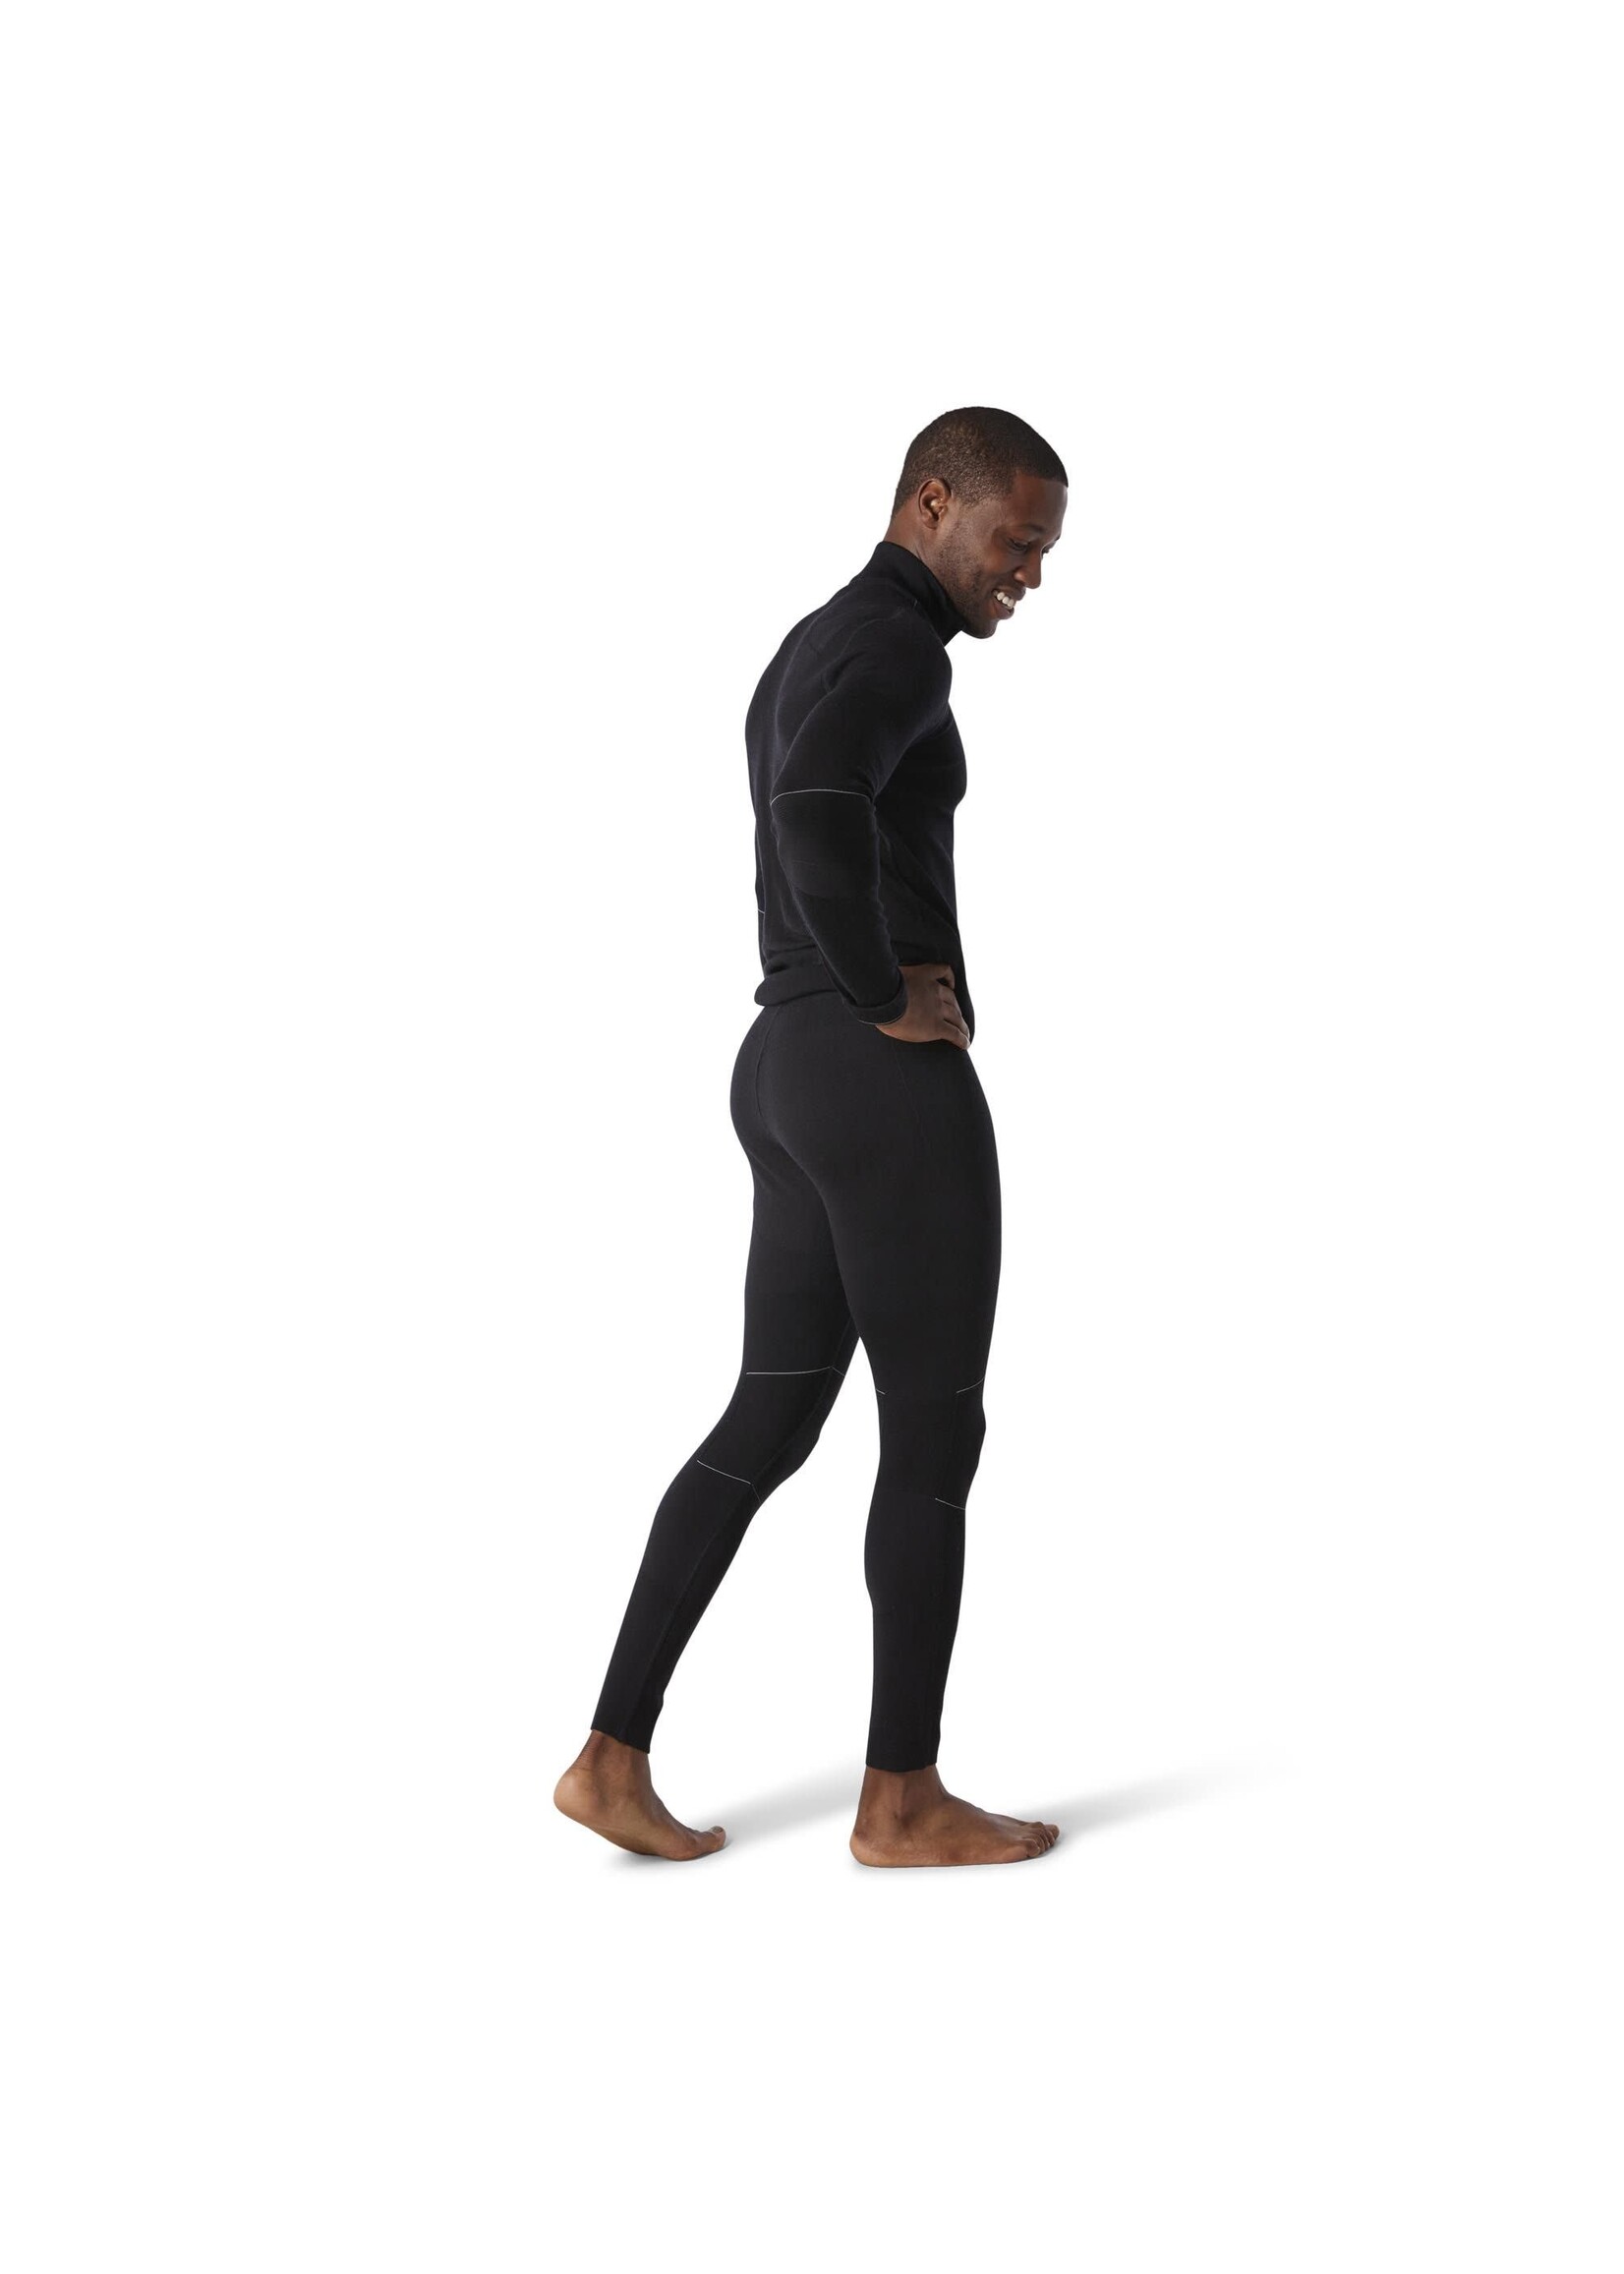 Smartwool Caleçon long thermal Intraknit Max Merino pour hommes